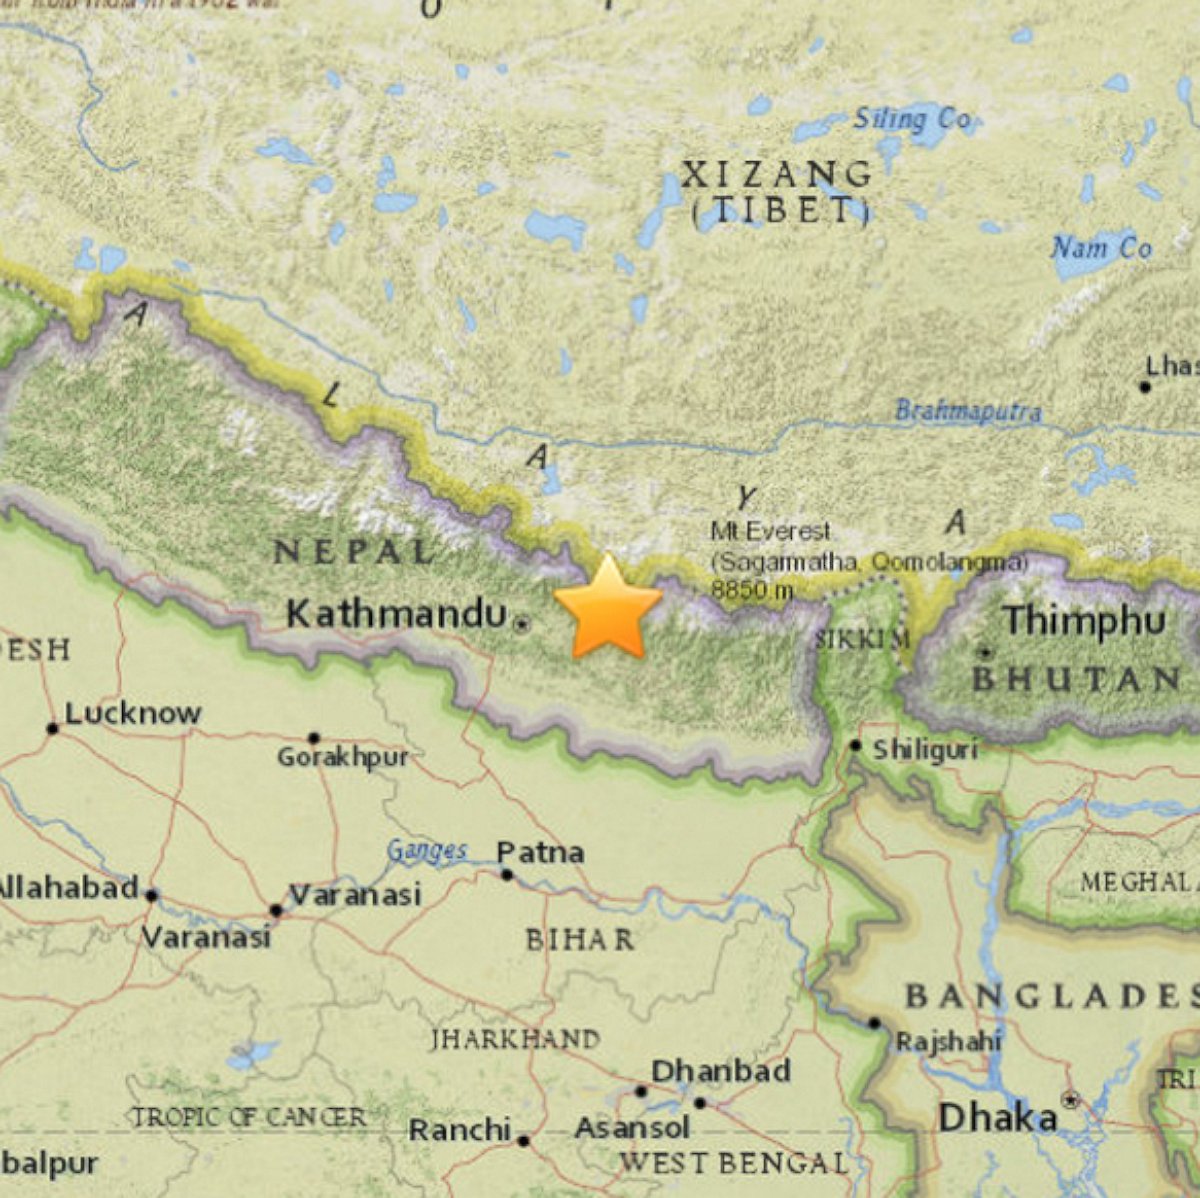 PHOTO: An image released by the United States Geological Survey shows the location of an earthquake in Nepal, May 12, 2015.